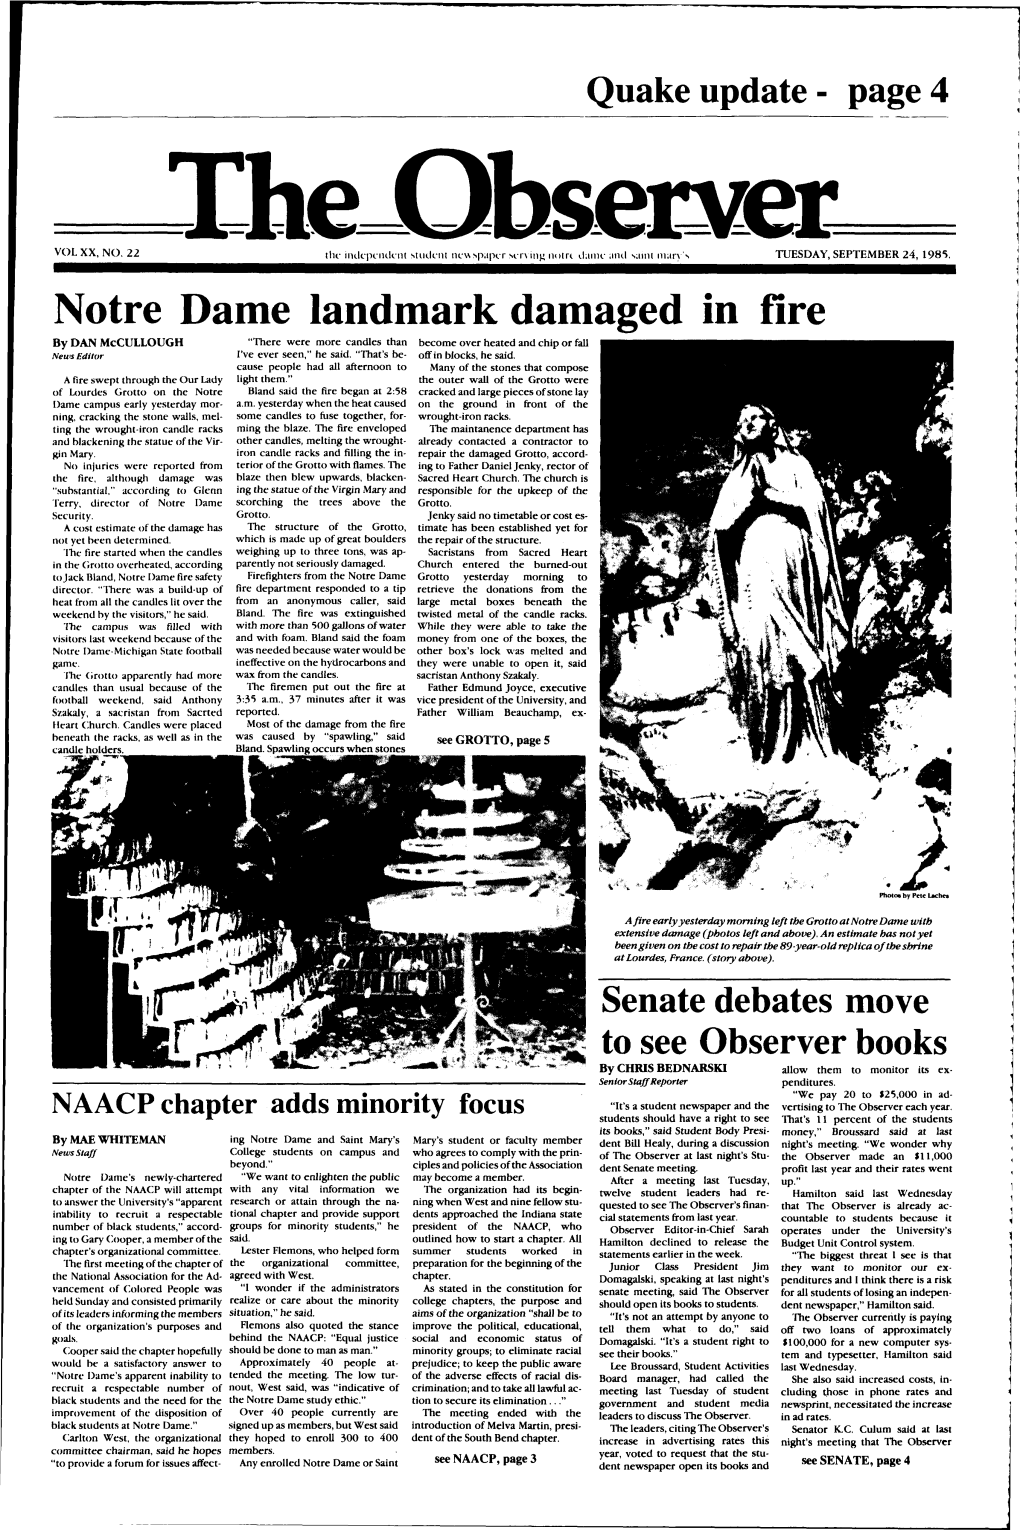 Notre Dame Landmark Damaged Ill Fire by DAN Mccullough "There Were More Candles Than Become Over Heated and Chip Or Fall News Editor I've Ever Seen," He Said